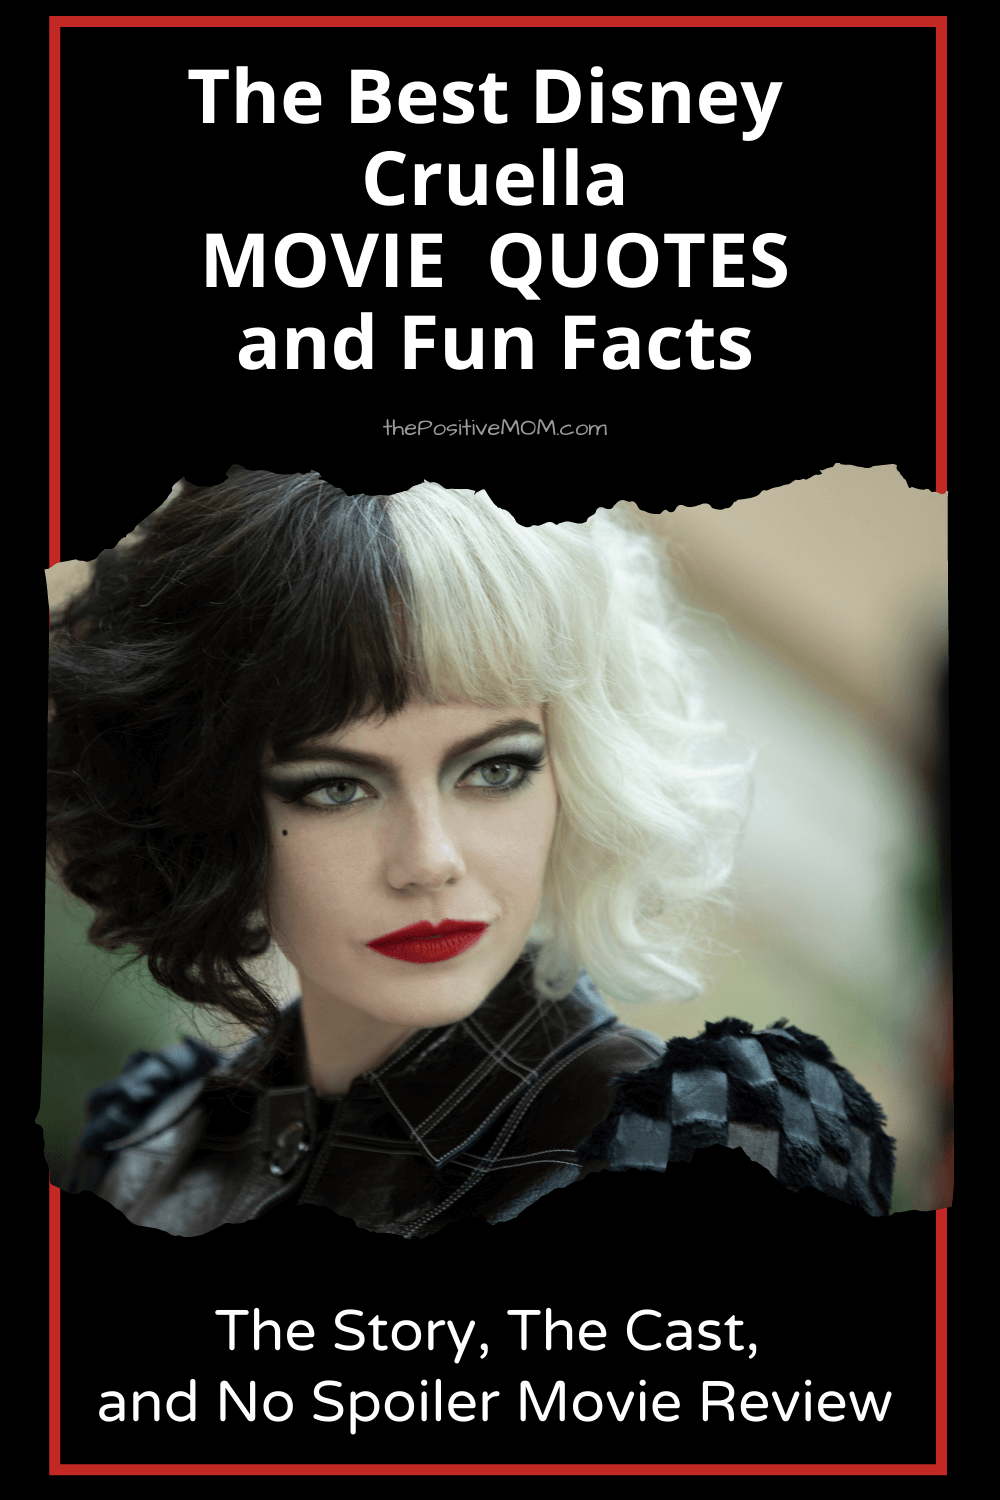 Emma Stone Is Chic and Spooky in the First Trailer for Disney's 'Cruella